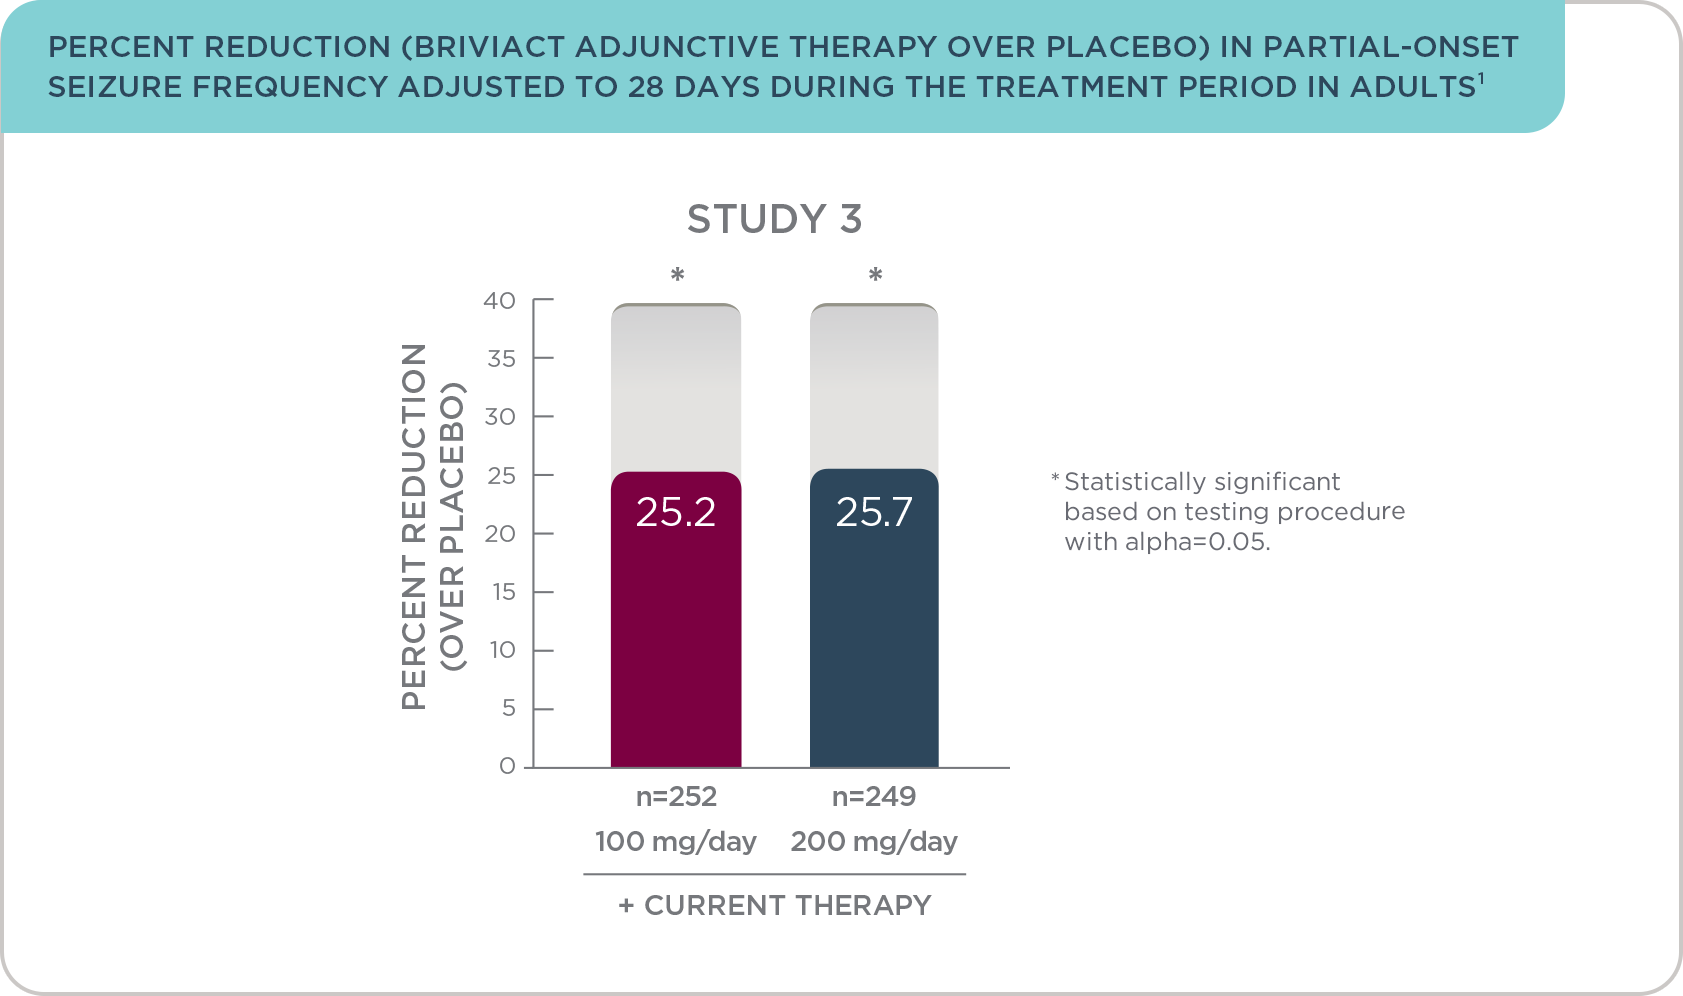 PERCENT REDUCTION (BRIVIACT ADJUNCTIVE THERAPY OVER PLACEBO) IN PARTIAL-ONSET SEIZURE FREQUENCY ADJUSTED TO 28 DAYS DURING THE TREATMENT PERIOD IN ADULTS1